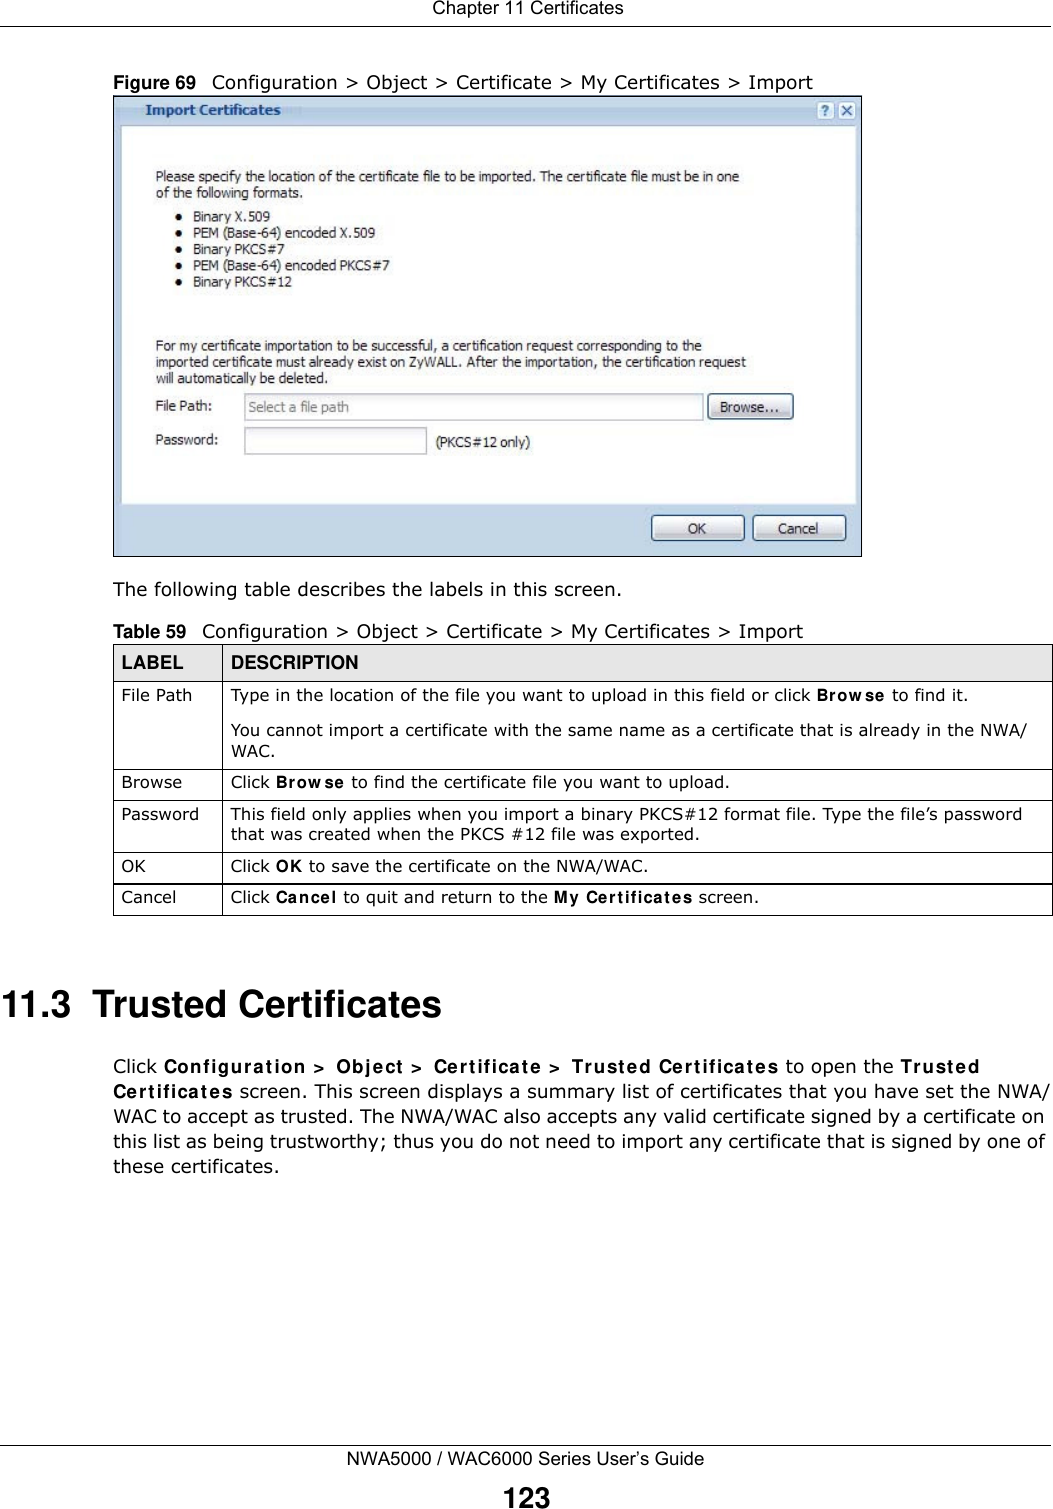  Chapter 11 CertificatesNWA5000 / WAC6000 Series User’s Guide123Figure 69   Configuration &gt; Object &gt; Certificate &gt; My Certificates &gt; ImportThe following table describes the labels in this screen.  11.3  Trusted CertificatesClick Configu rat ion  &gt;  Object  &gt;  Cer t ifica t e &gt;  Trust ed Cert ifica t es to open the Tr ust ed Ce r t if ica t e s screen. This screen displays a summary list of certificates that you have set the NWA/WAC to accept as trusted. The NWA/WAC also accepts any valid certificate signed by a certificate on this list as being trustworthy; thus you do not need to import any certificate that is signed by one of these certificates. Table 59   Configuration &gt; Object &gt; Certificate &gt; My Certificates &gt; ImportLABEL DESCRIPTIONFile Path  Type in the location of the file you want to upload in this field or click Br ow se to find it.You cannot import a certificate with the same name as a certificate that is already in the NWA/WAC.Browse Click Brow se to find the certificate file you want to upload. Password This field only applies when you import a binary PKCS#12 format file. Type the file’s password that was created when the PKCS #12 file was exported. OK Click OK to save the certificate on the NWA/WAC.Cancel Click Cance l to quit and return to the My Certificat e s screen.